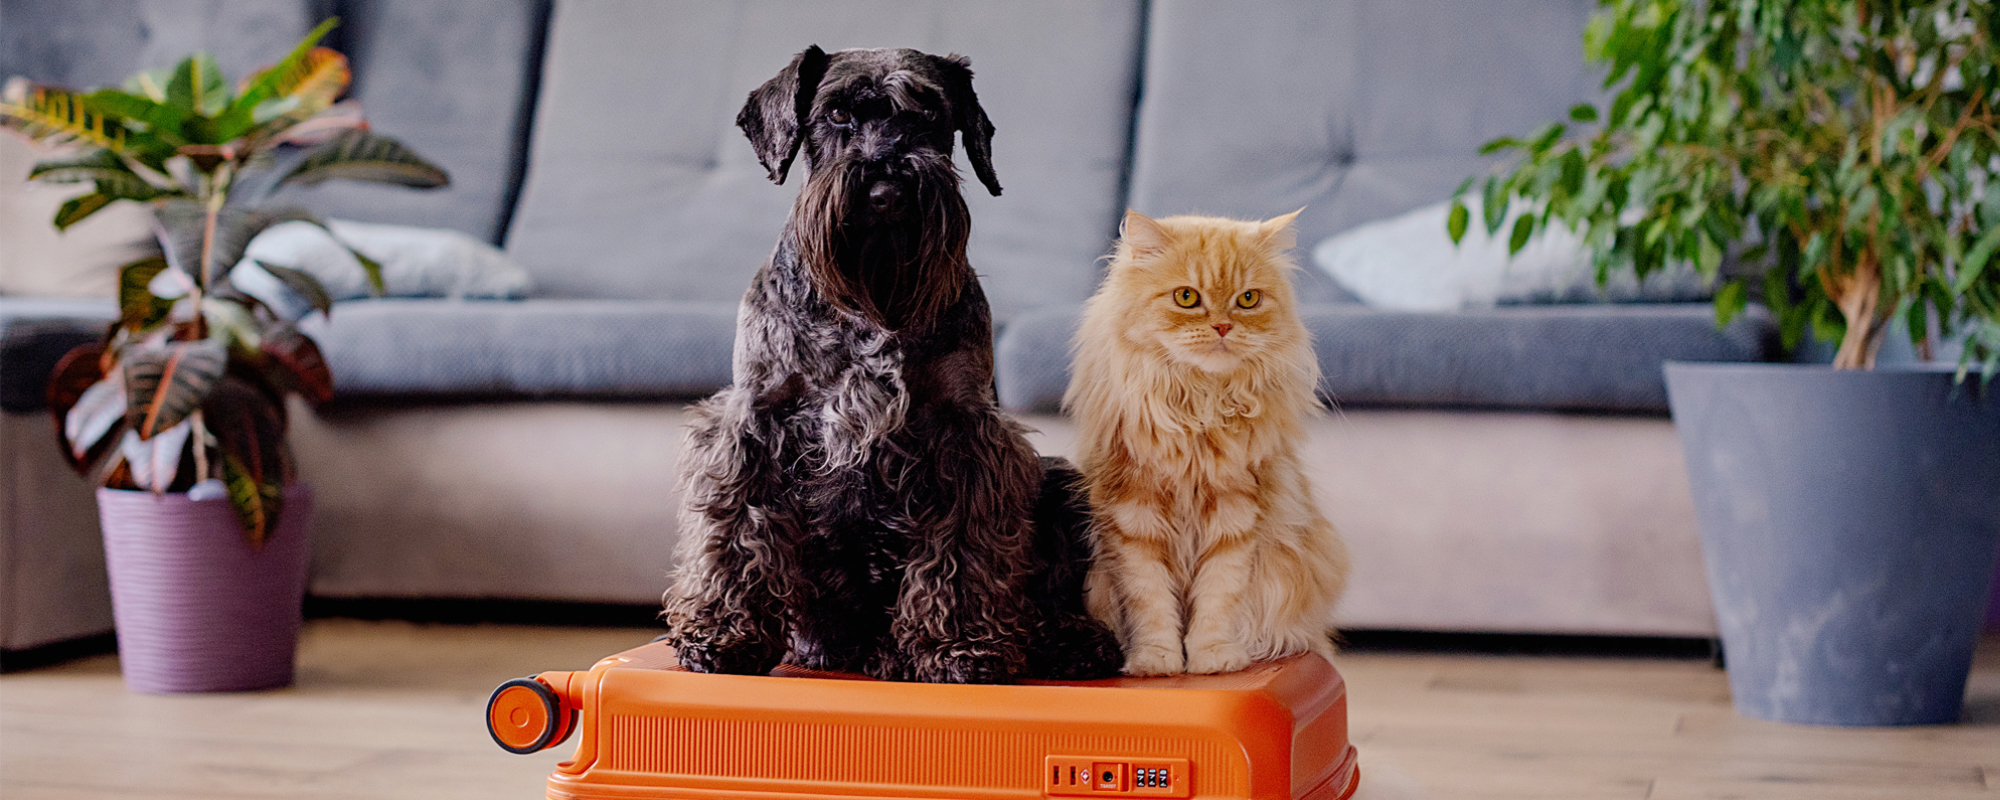 Fur-tastic Adventures: Travelling with Your Beloved Pets, and Why Pet Insurance Matters